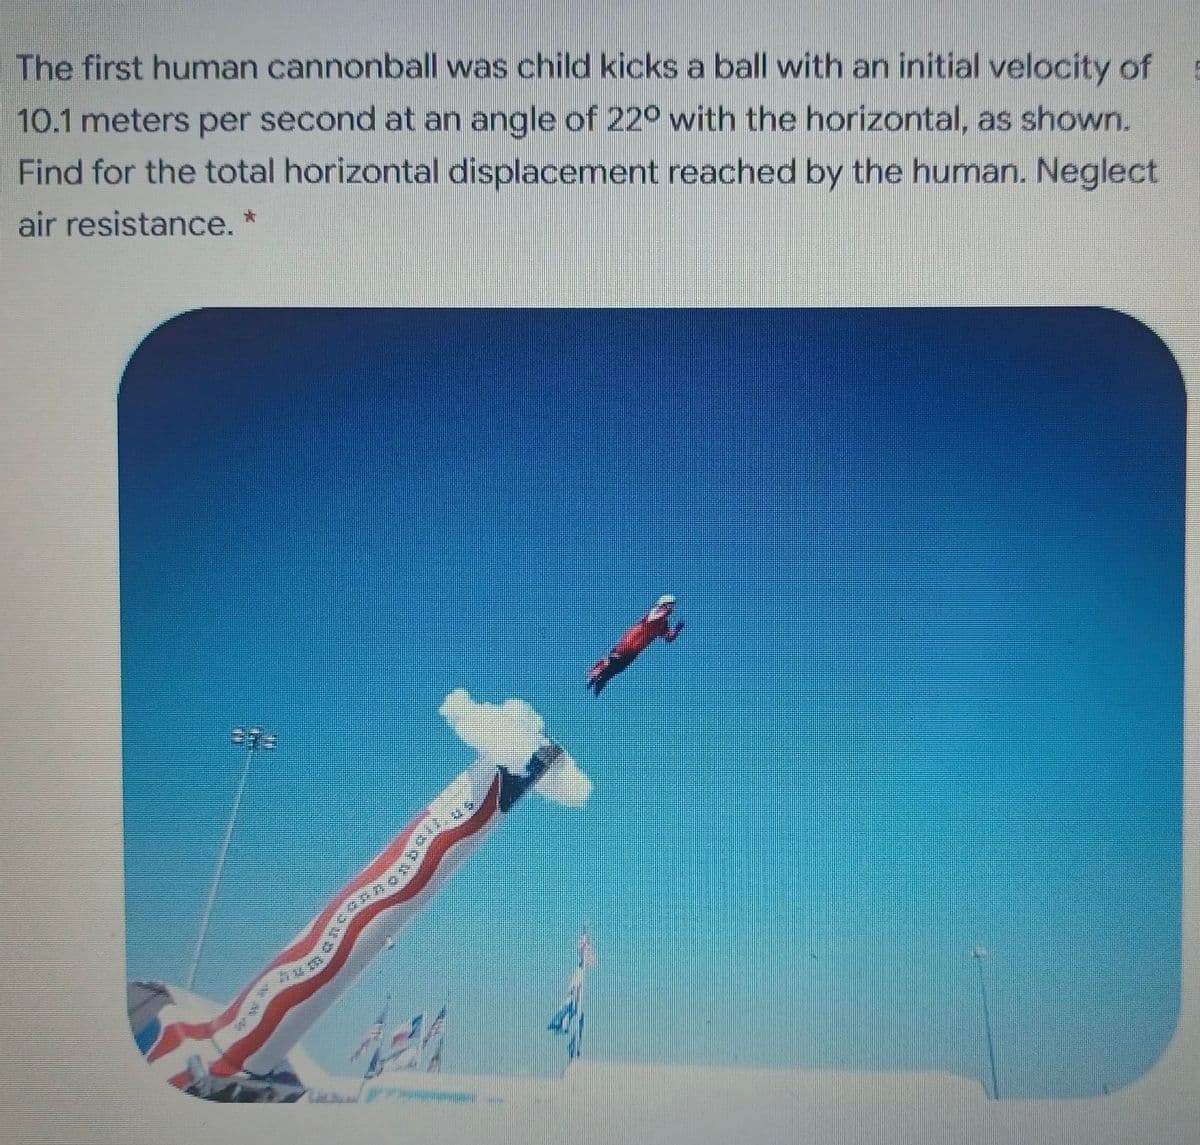 The first human cannonball was child kicks a ball with an initial velocity of
10.1 meters per second at an angle of 220 with the horizontal, as shown.
Find for the total horizontal displacement reached by the human. Neglect
air resistance. *
